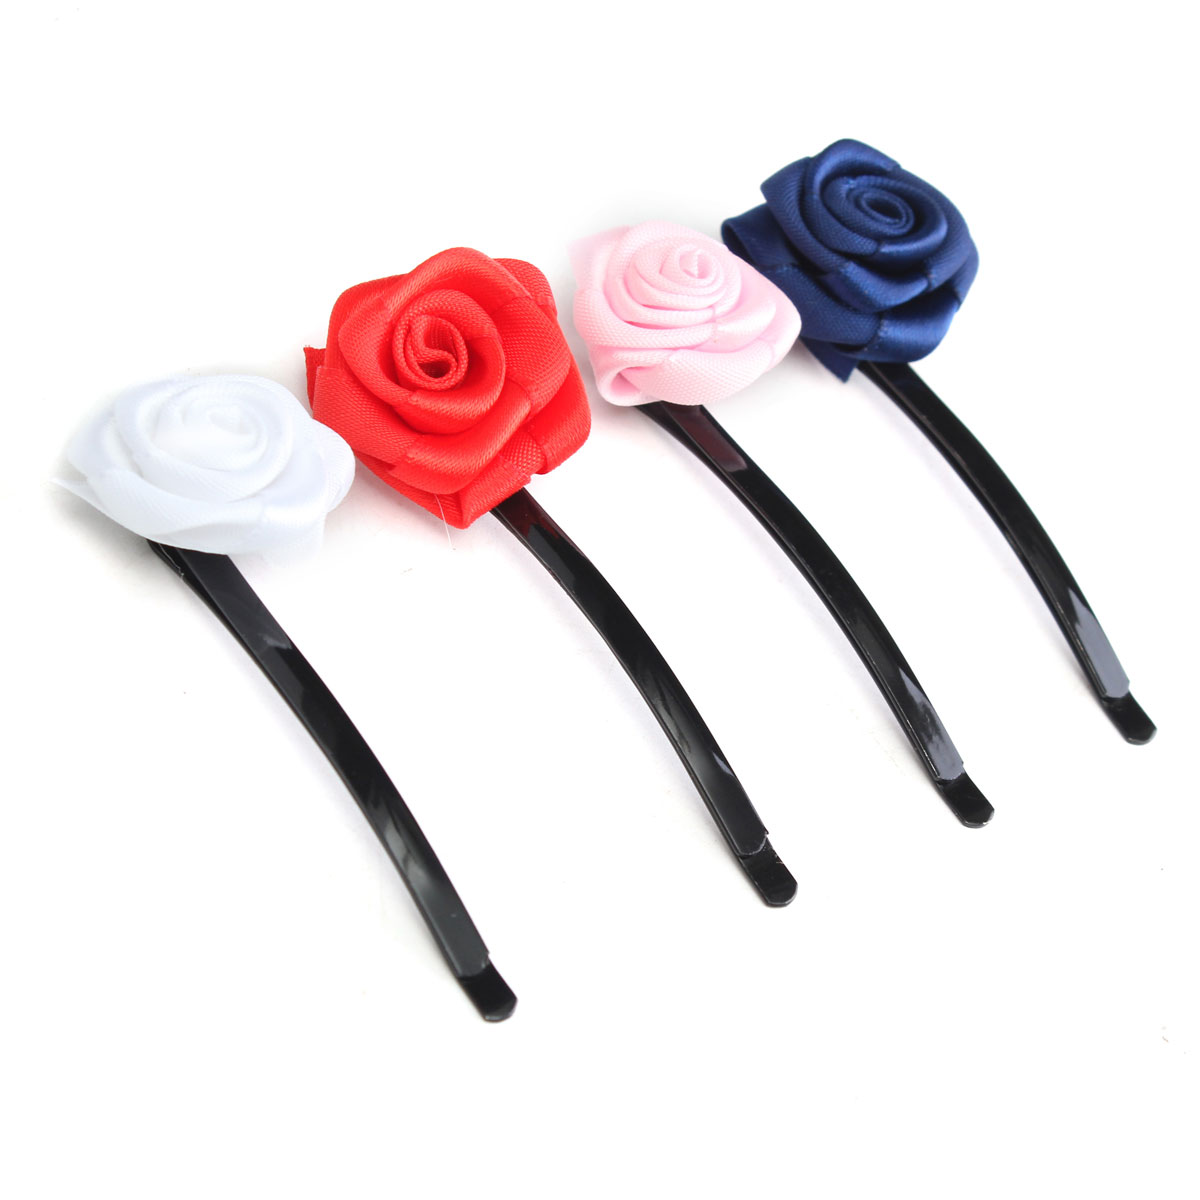 6pcs-Rose-Flowers-Hair-Pins-Grips-Clips-Accessories-for-Wedding-Party-1037583-6